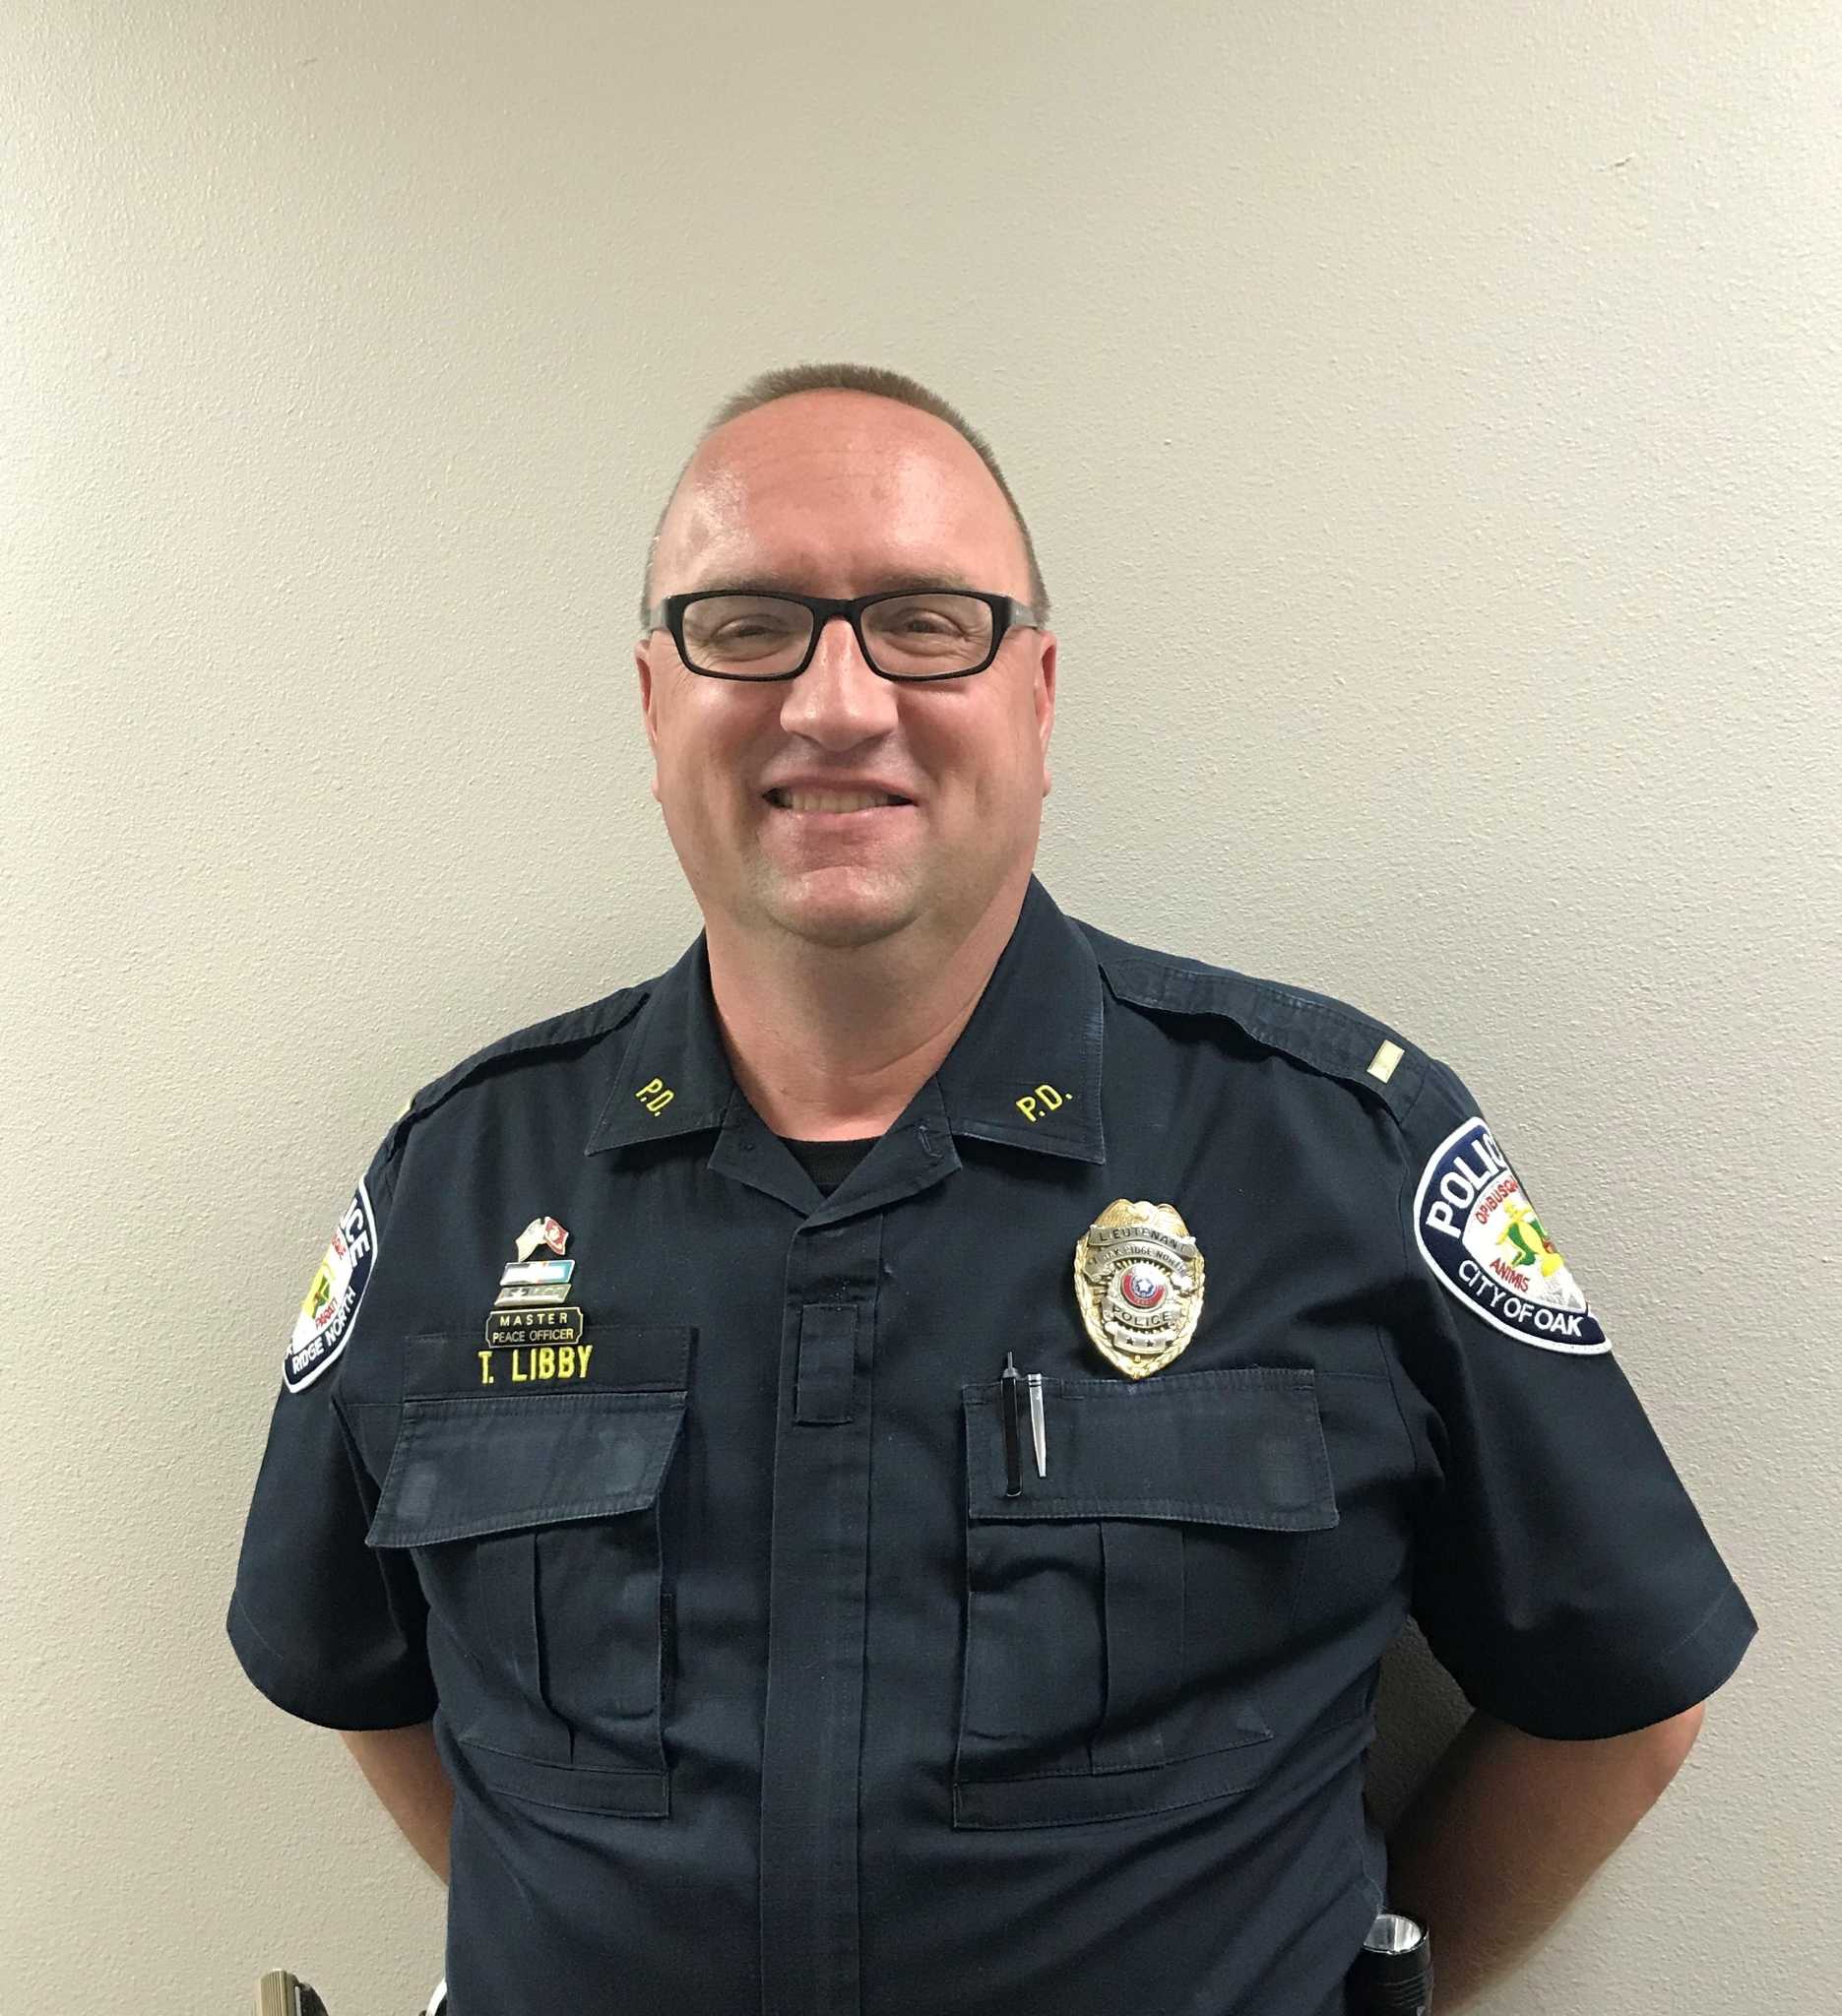 Veteran Lt. Tom Libby to replace outgoing Oak Ridge North police chief - Houston Chronicle